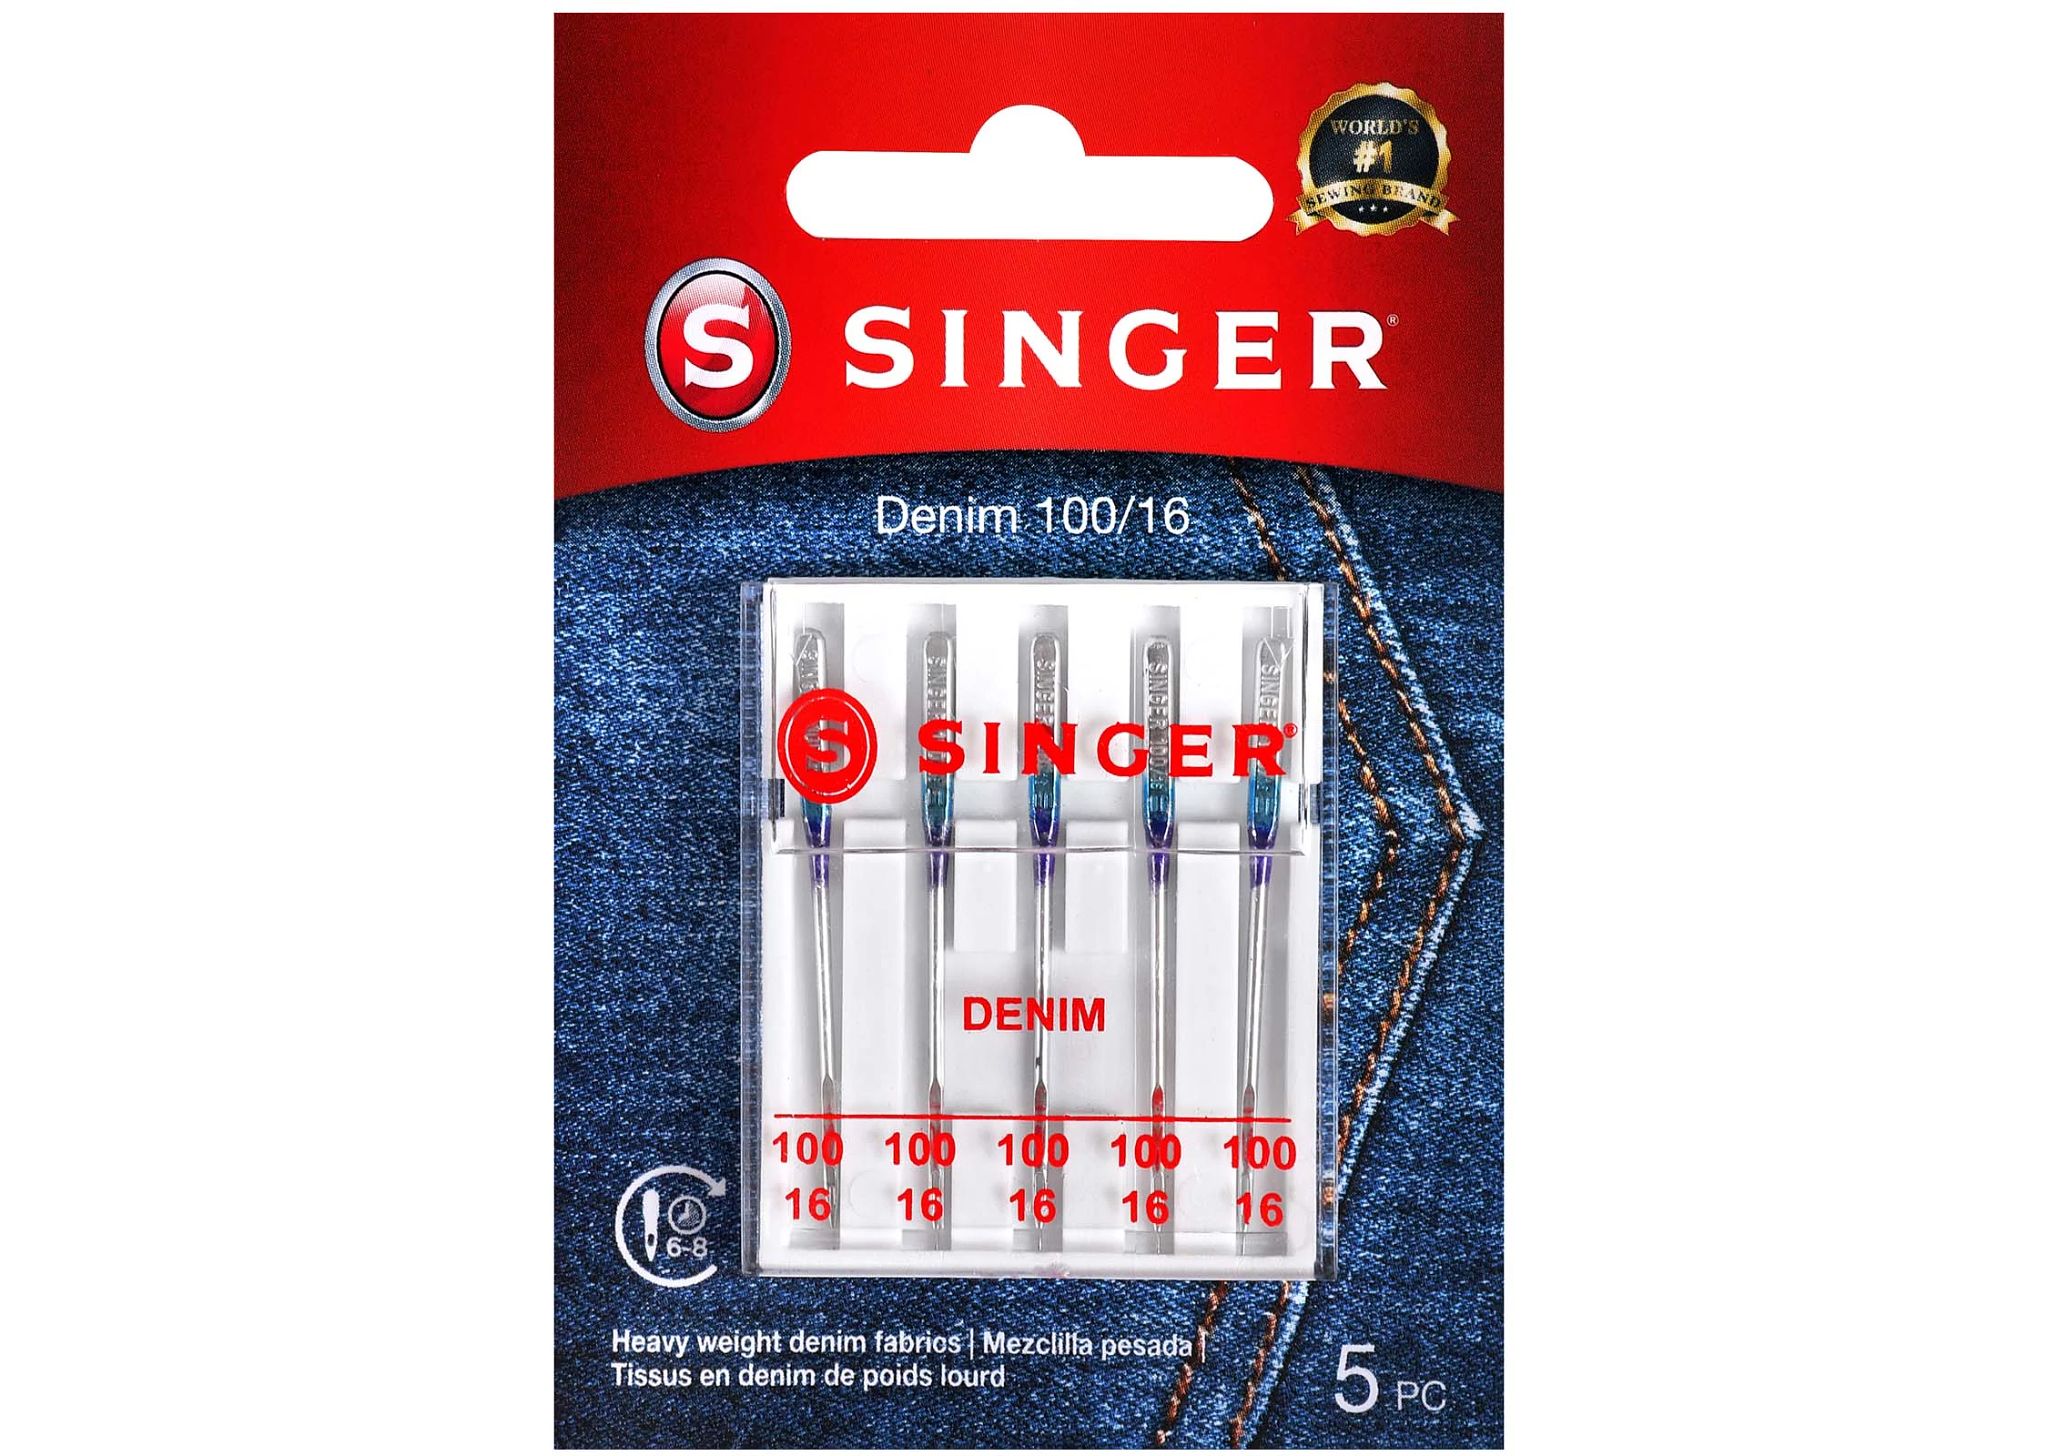 Needles for Singer Start 1304 Sewing Machine - FREE Shipping over